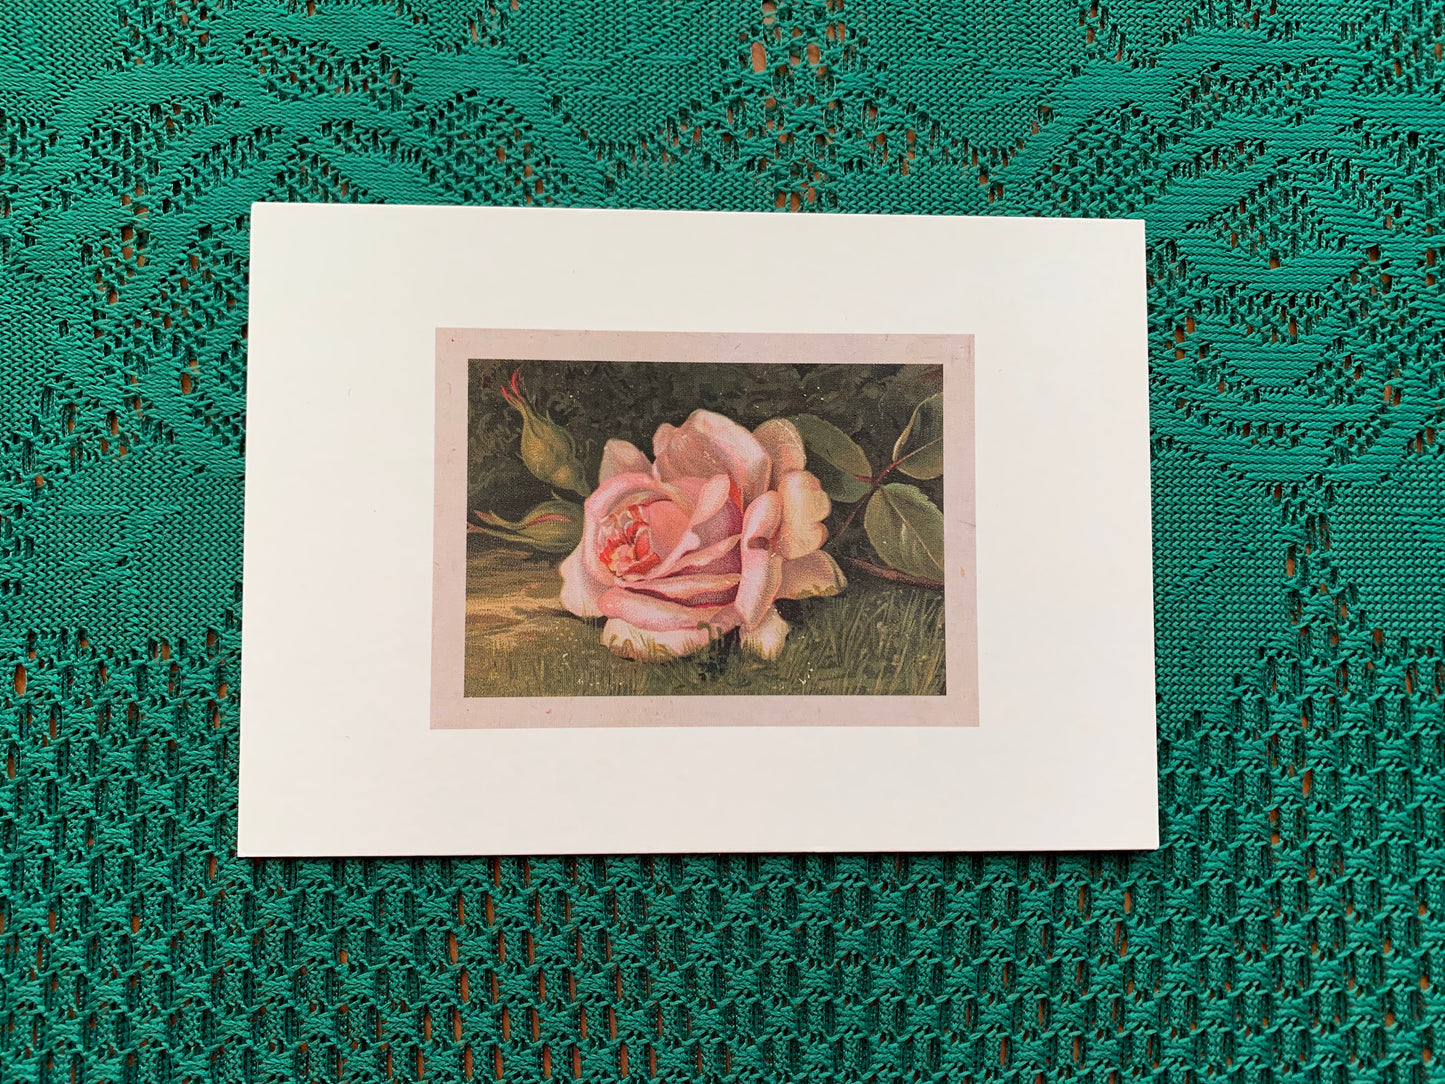 Finnish art postcard with rose - Printed in Finland - Greeting card, collectible postcard - Flowers - unused